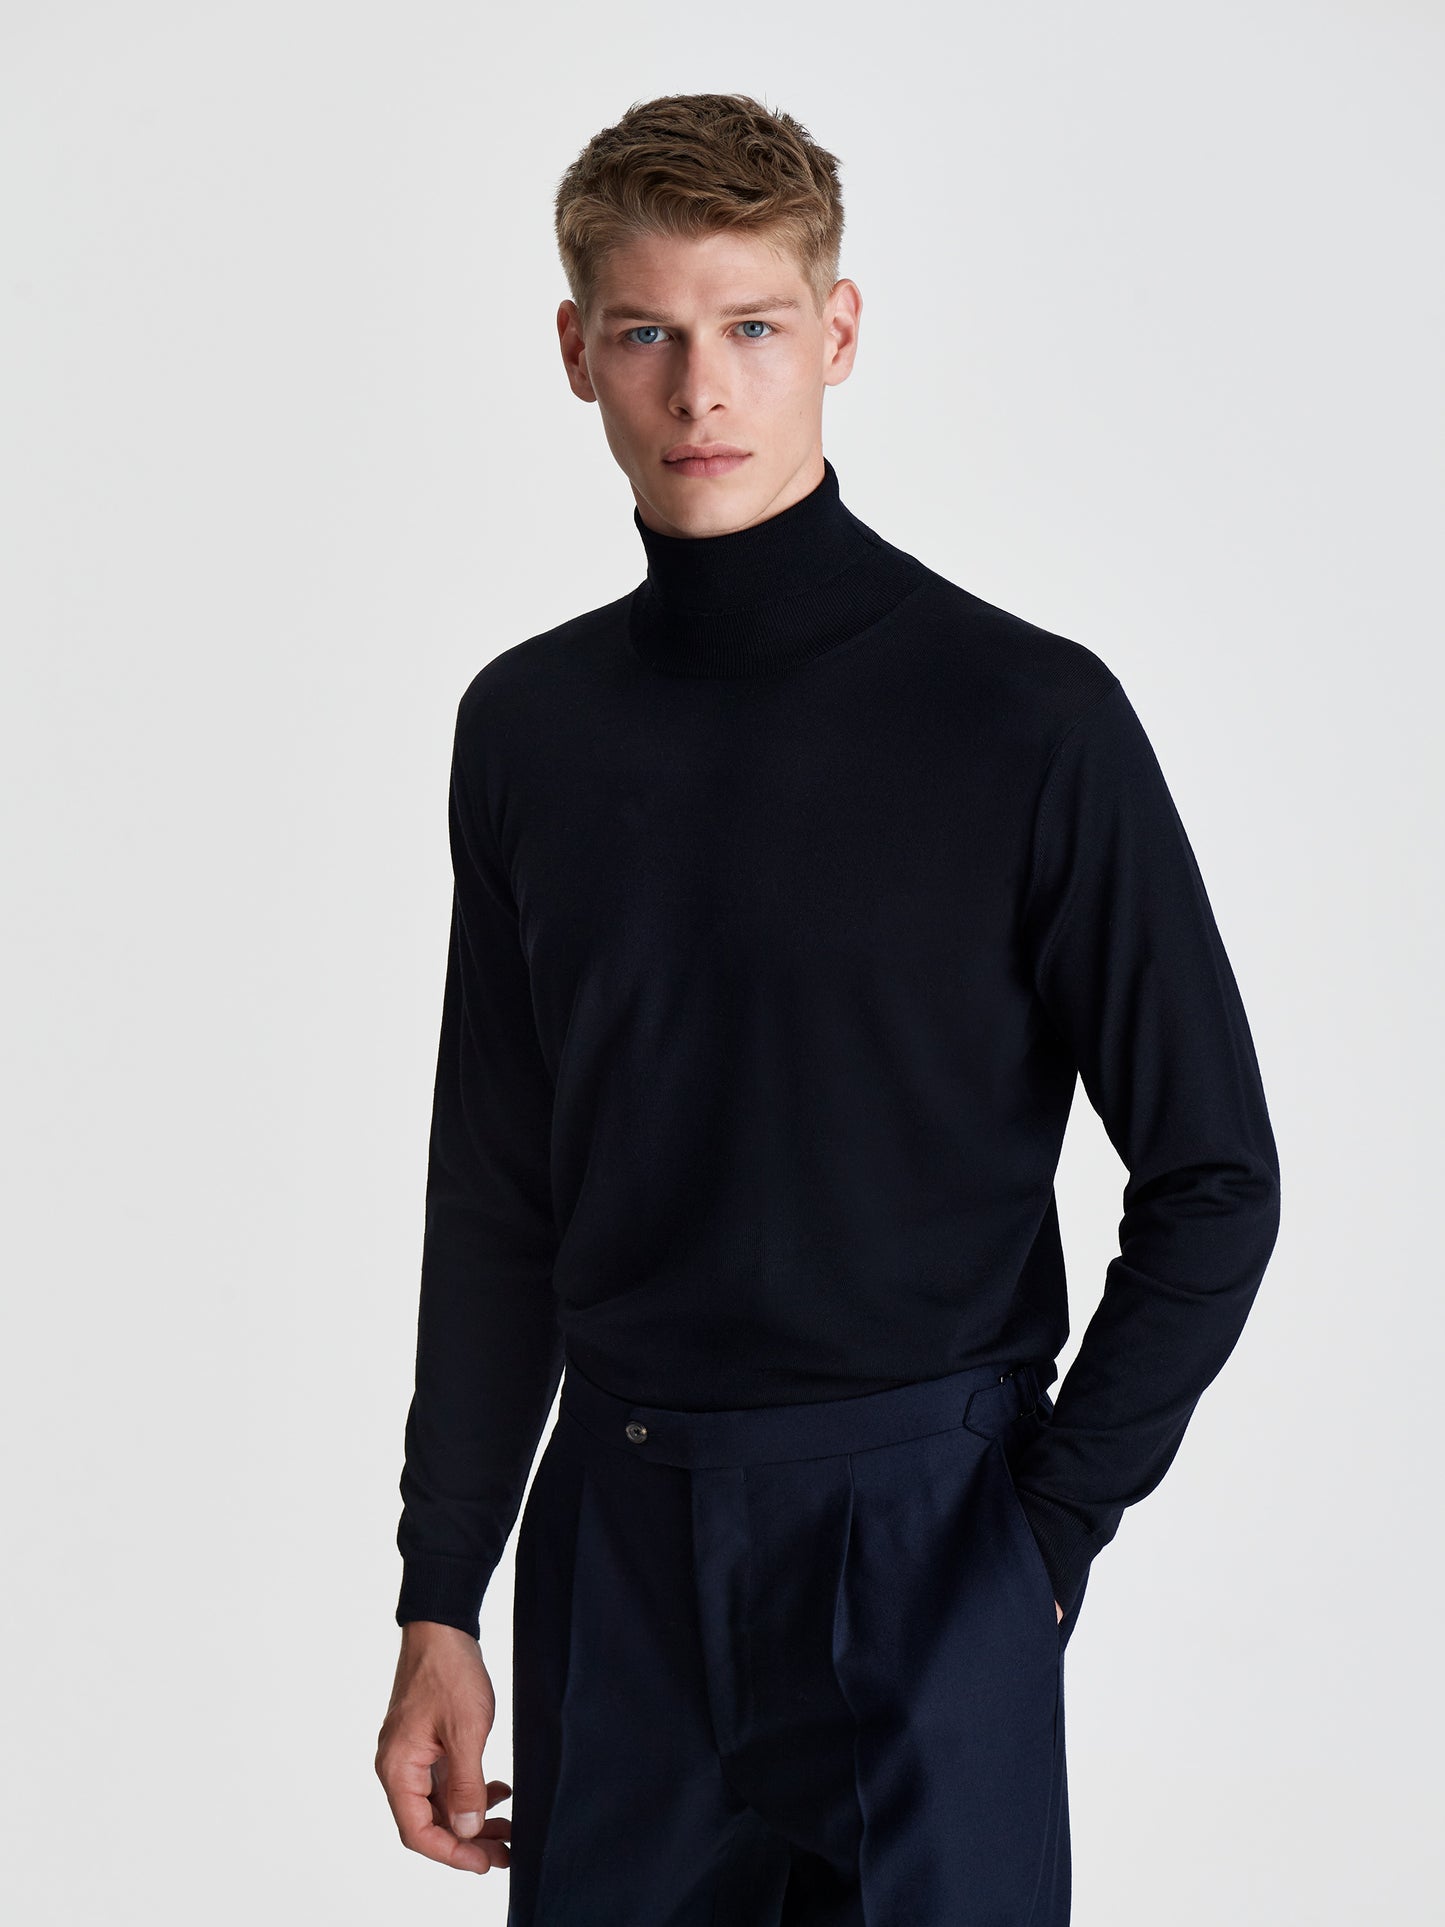 Merino Wool Extrafine Roll neck Sweater Navy Cropped Model Image